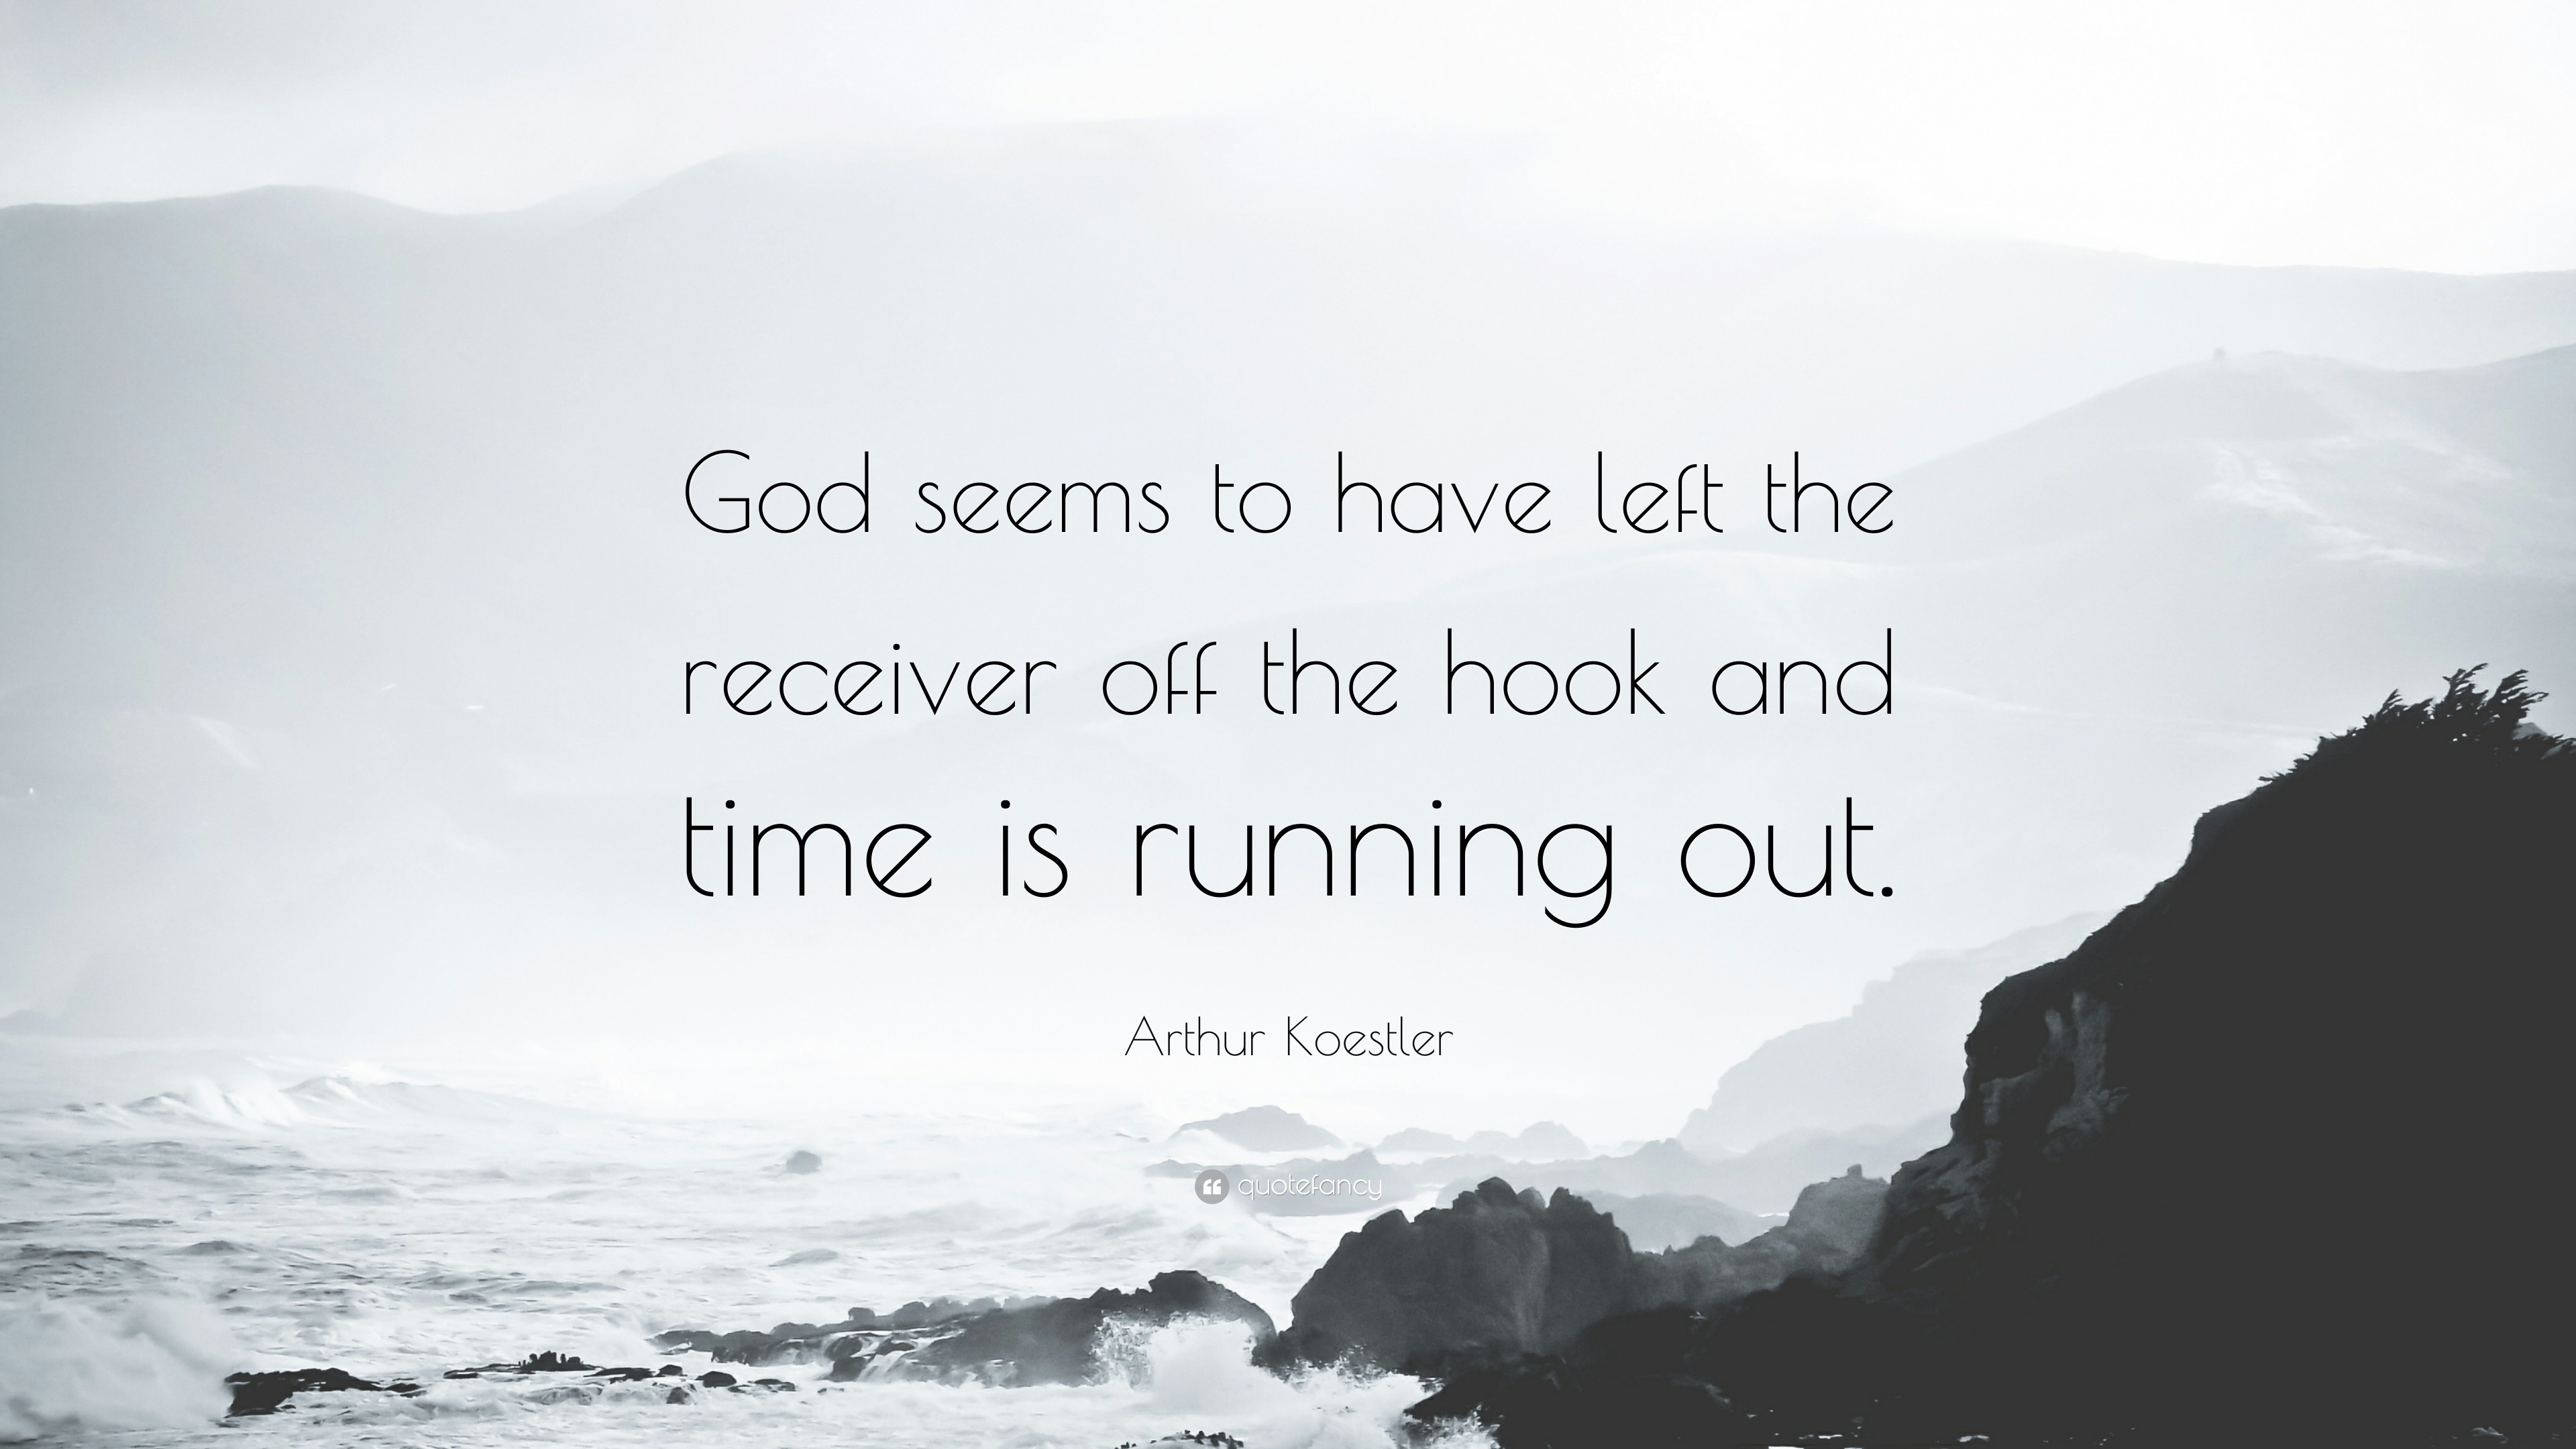 Arthur Koestler Quote “God seems to have left the receiver off the hook and